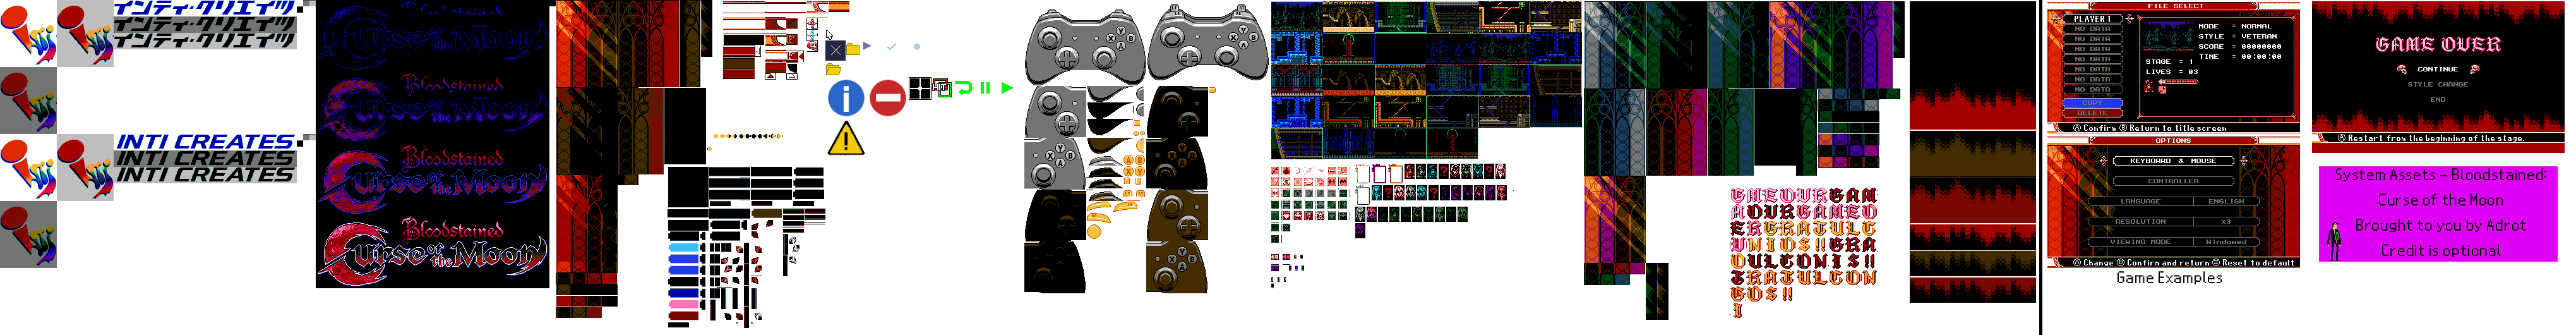 Pc Computer Bloodstained Curse Of The Moon System Assets The Spriters Resource